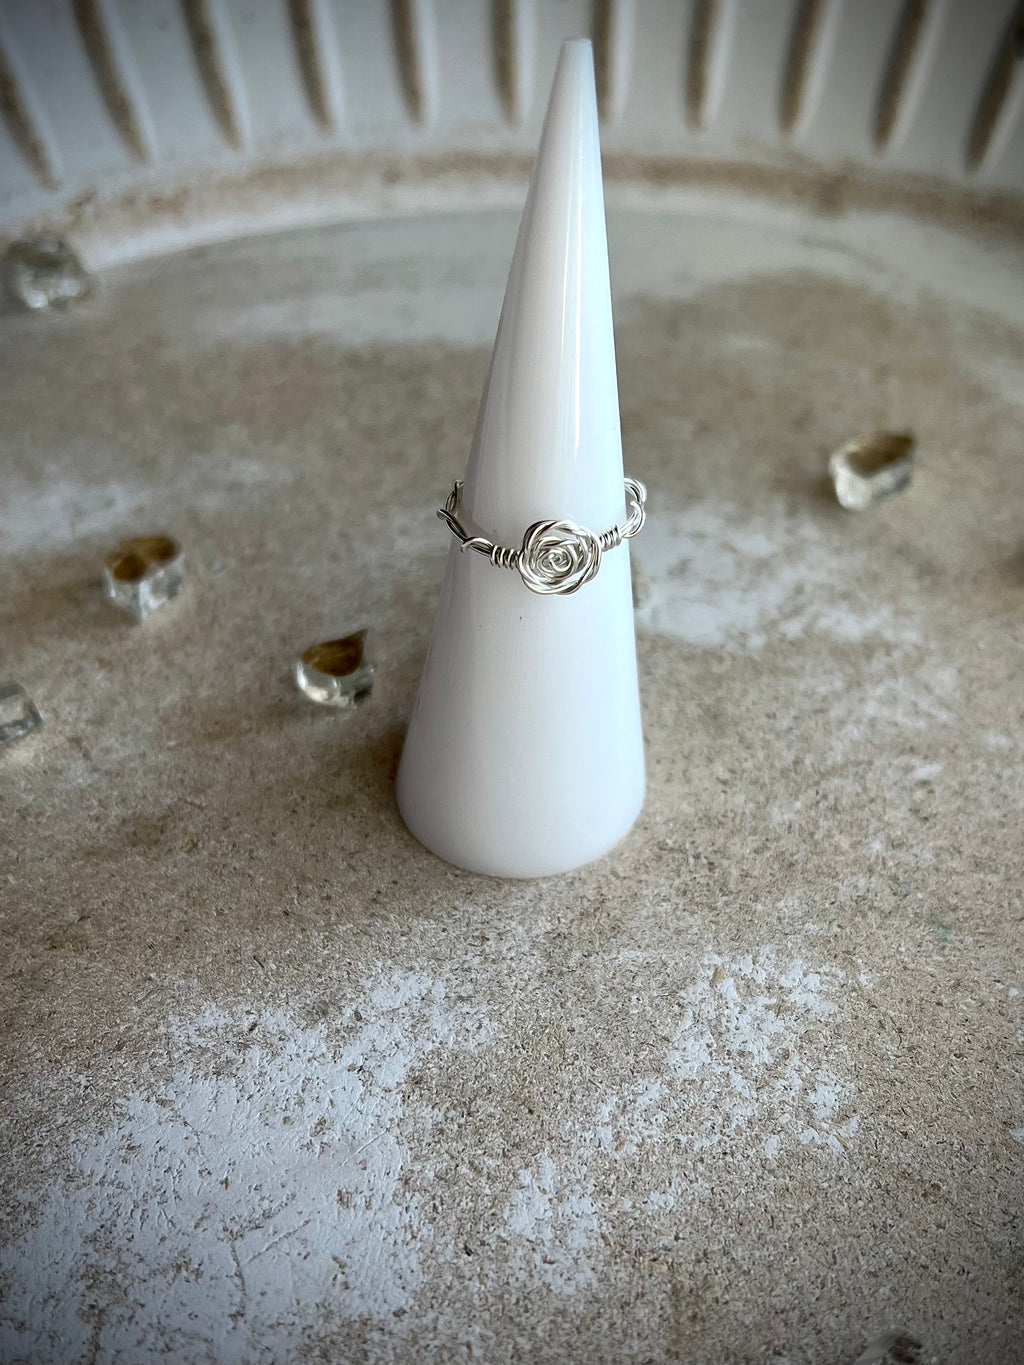 Nested rose ring - no stone.